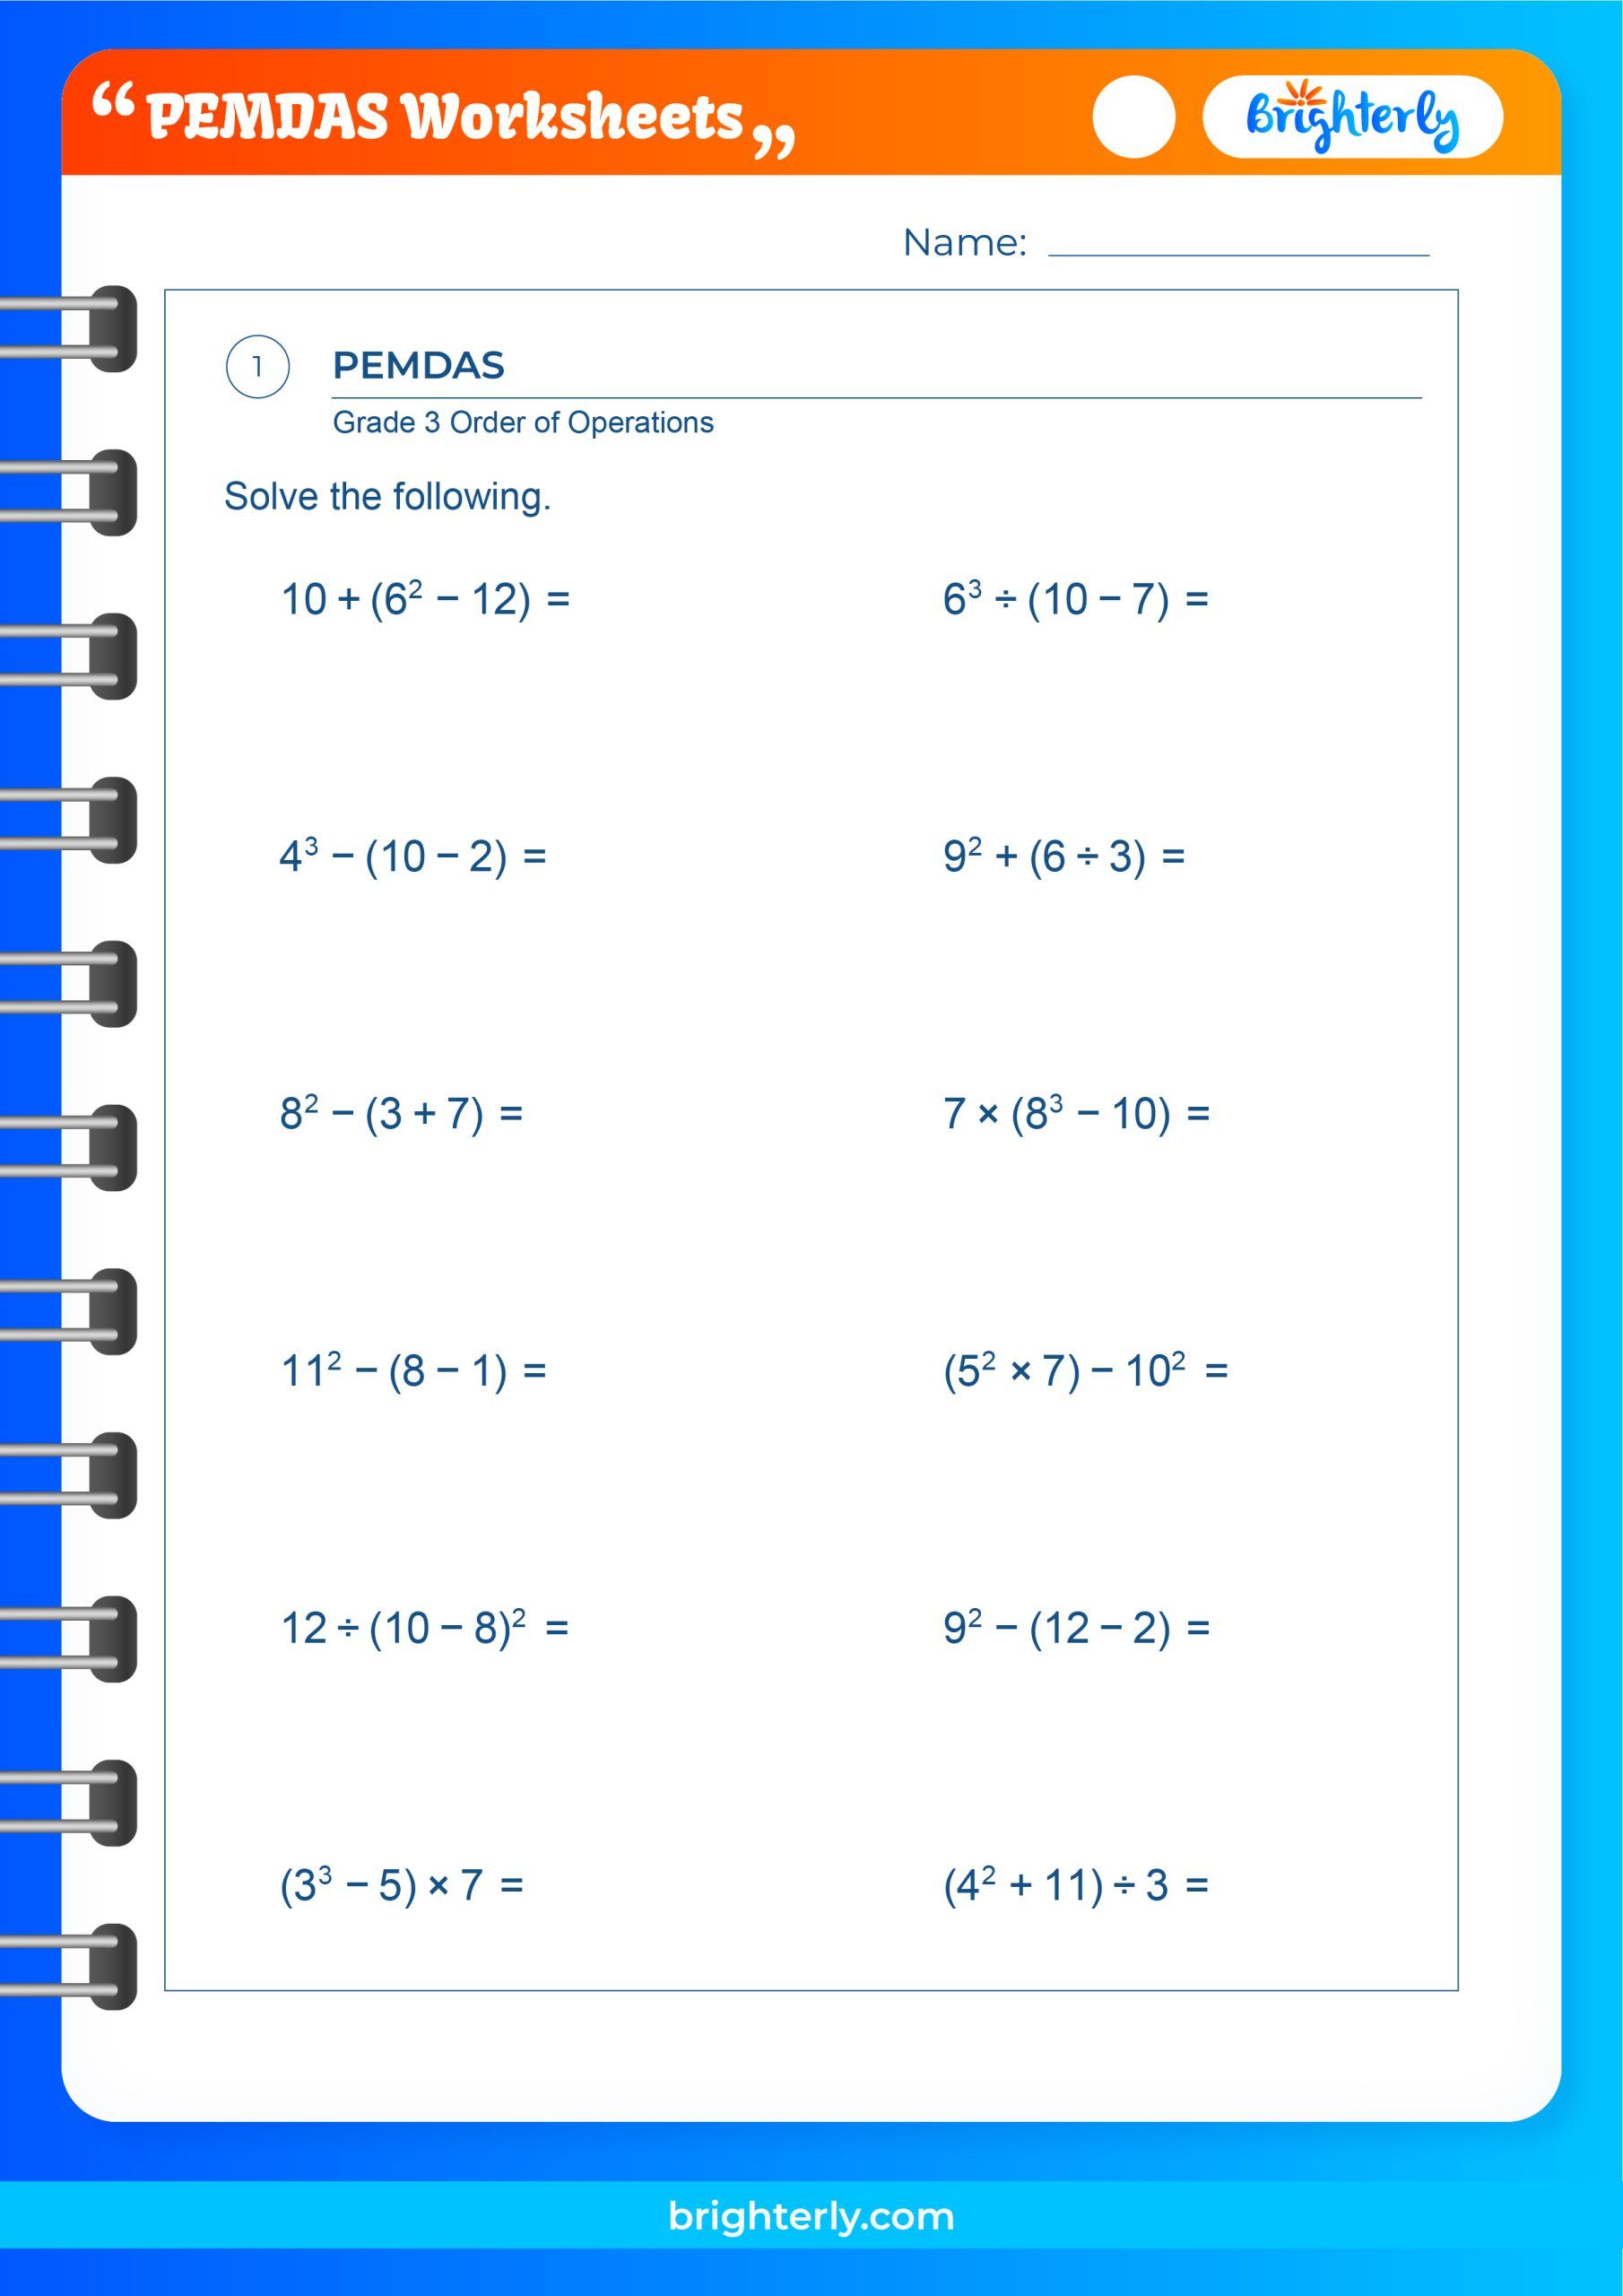 6th grade pemdas worksheet with answers